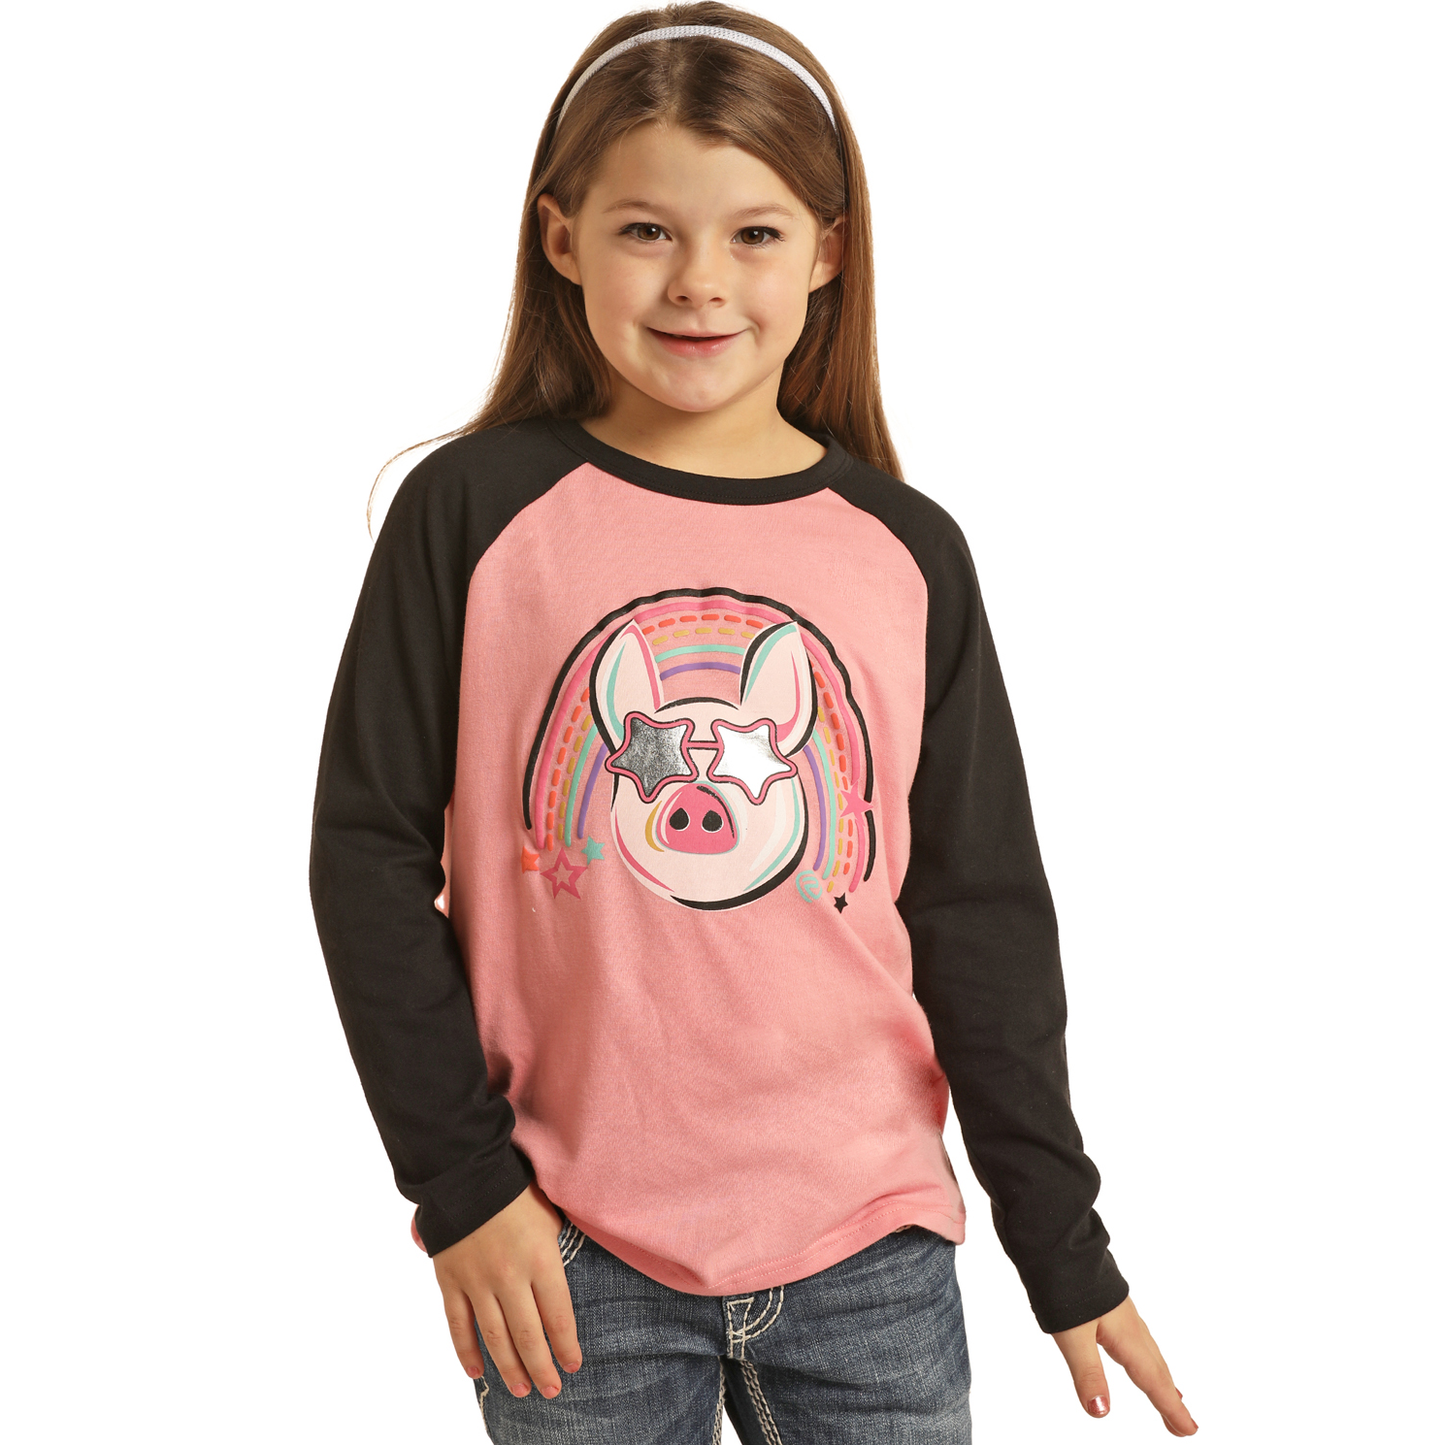 Rock & Roll® Youth Girl's Pink Graphic Baseball T-Shirt RRGT22R06X-68